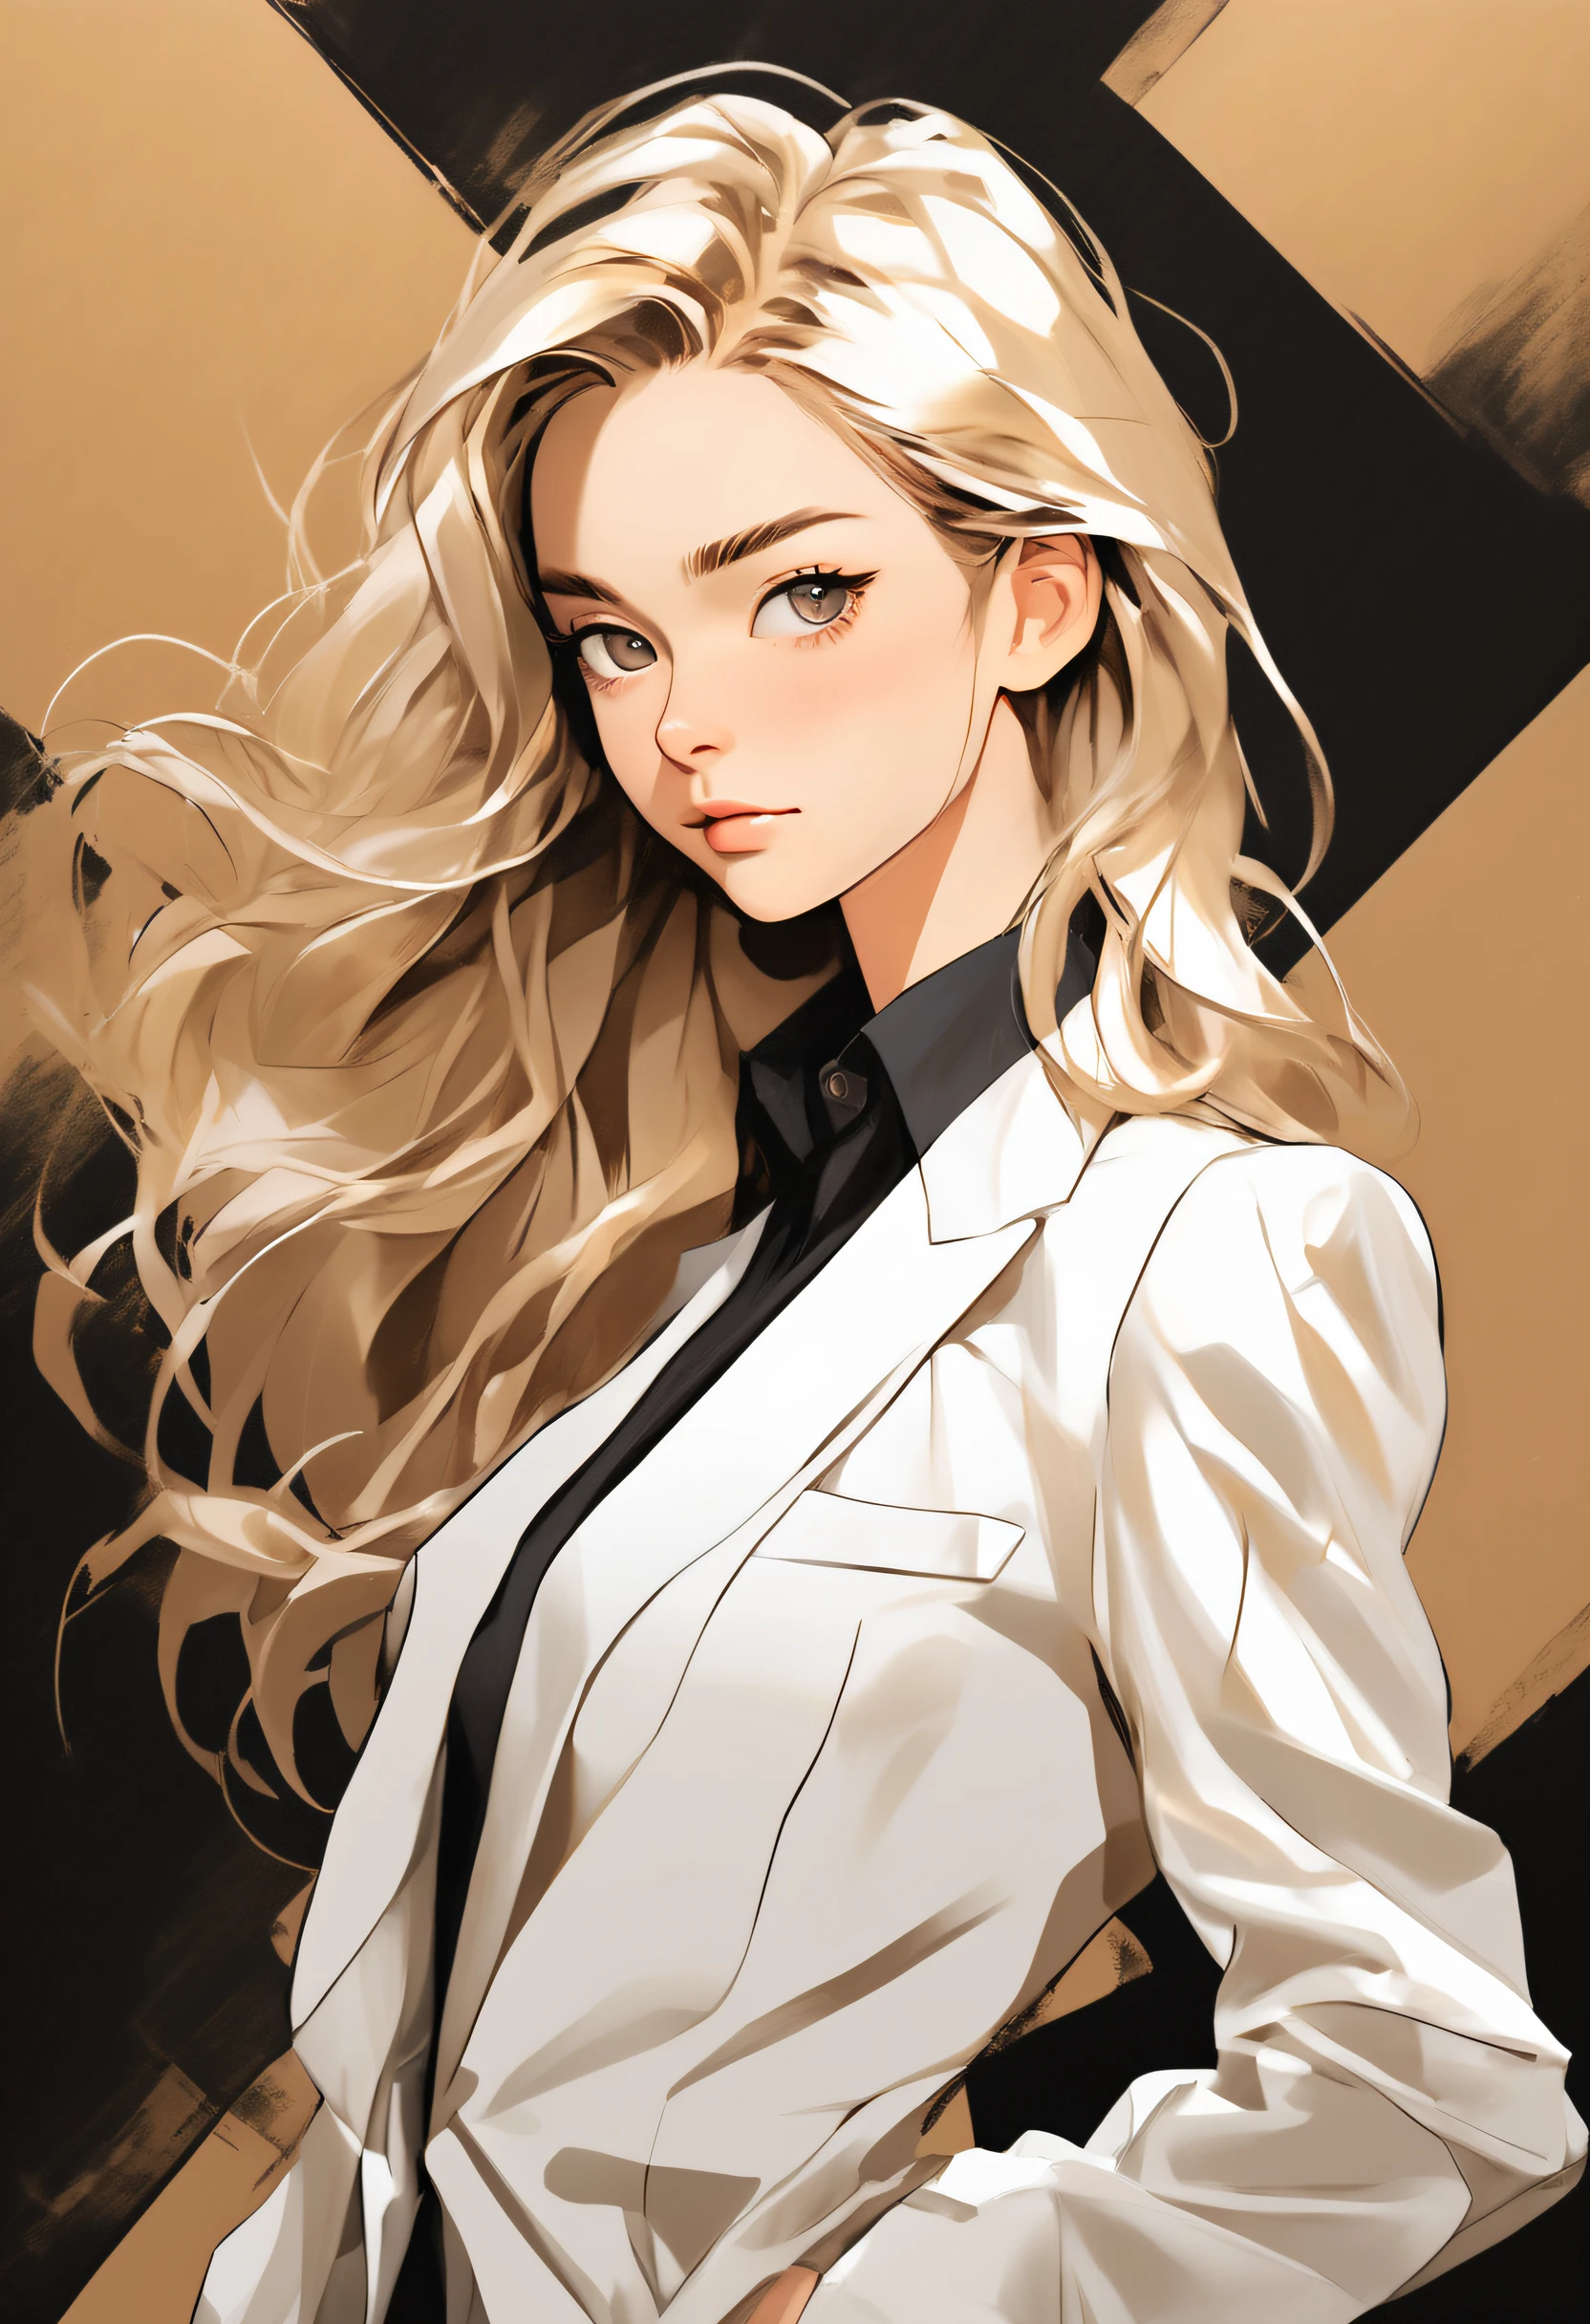 Anime girl in a white suit, Front-facing portrait, Long hair, Professional woman, V-neck shirt set, Fine brush stroke style, cartoon realism, in the style of light bronze and light black, office backdrop, Colorful cartoon style